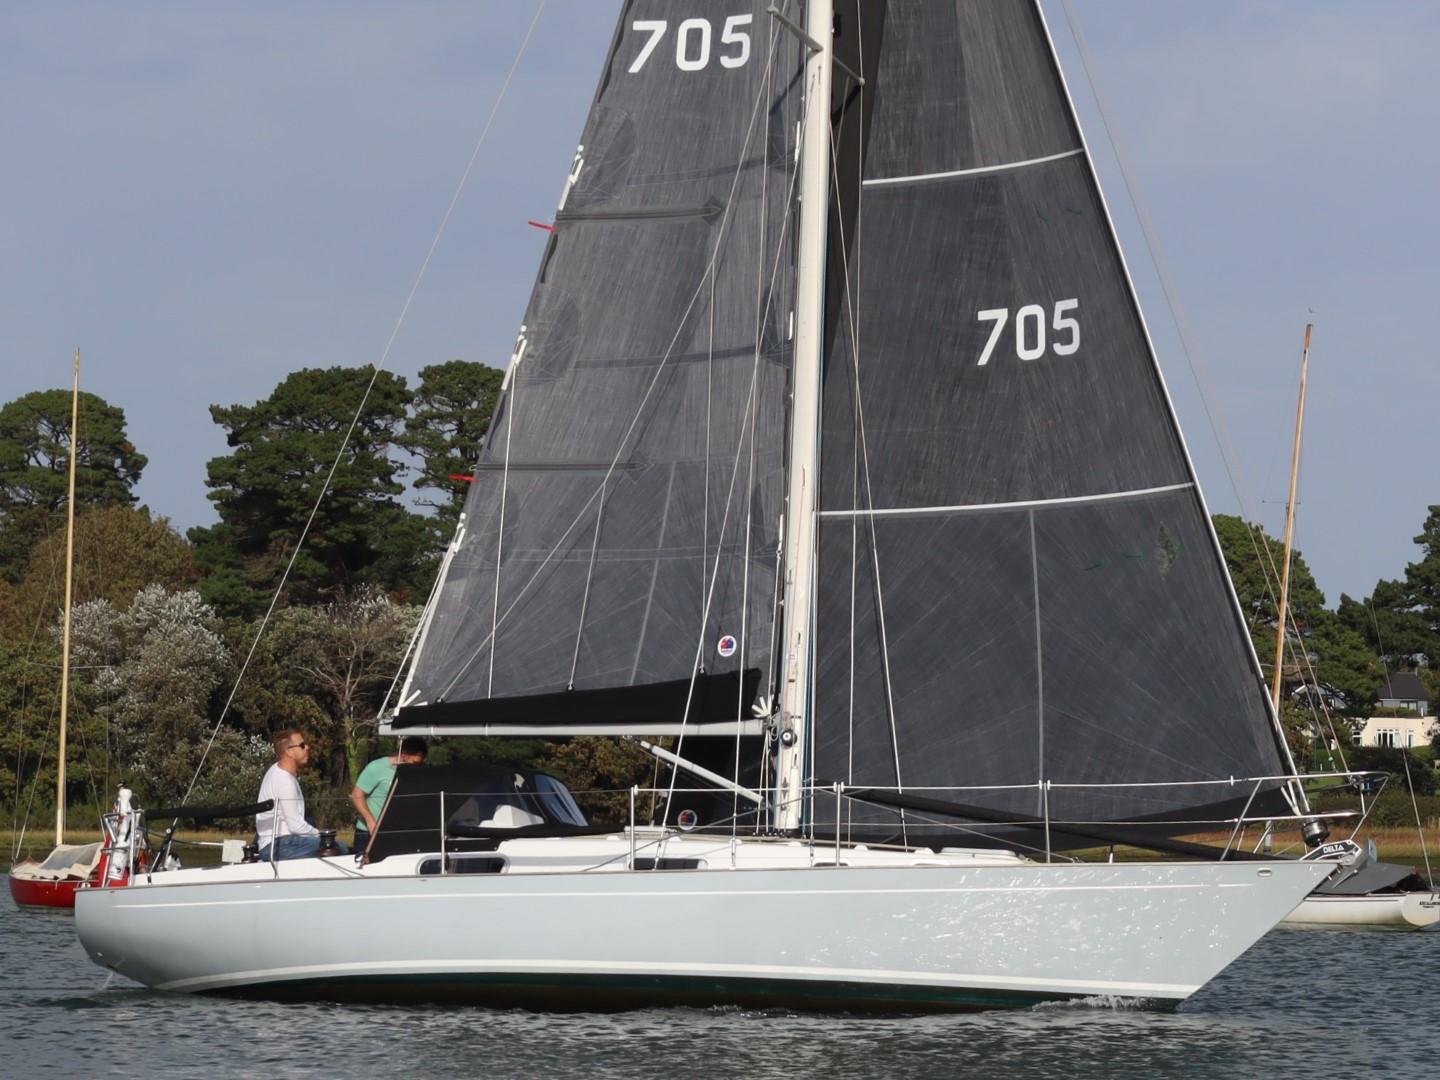 One Design Cork 1720 racer/cruisers sailboats for sale - United